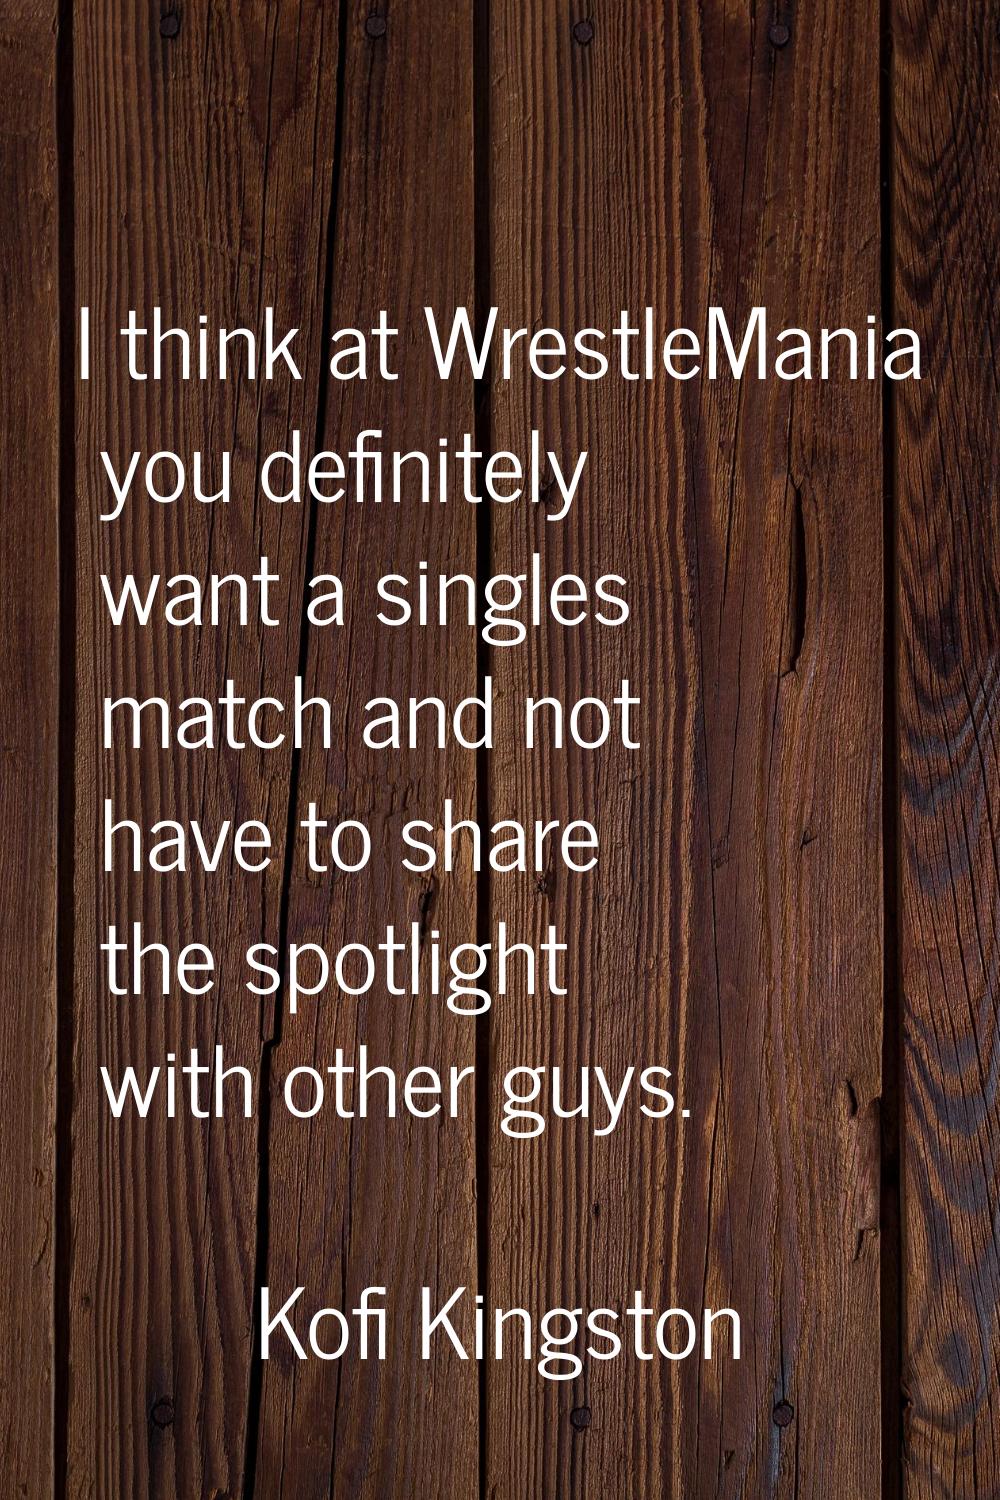 I think at WrestleMania you definitely want a singles match and not have to share the spotlight wit